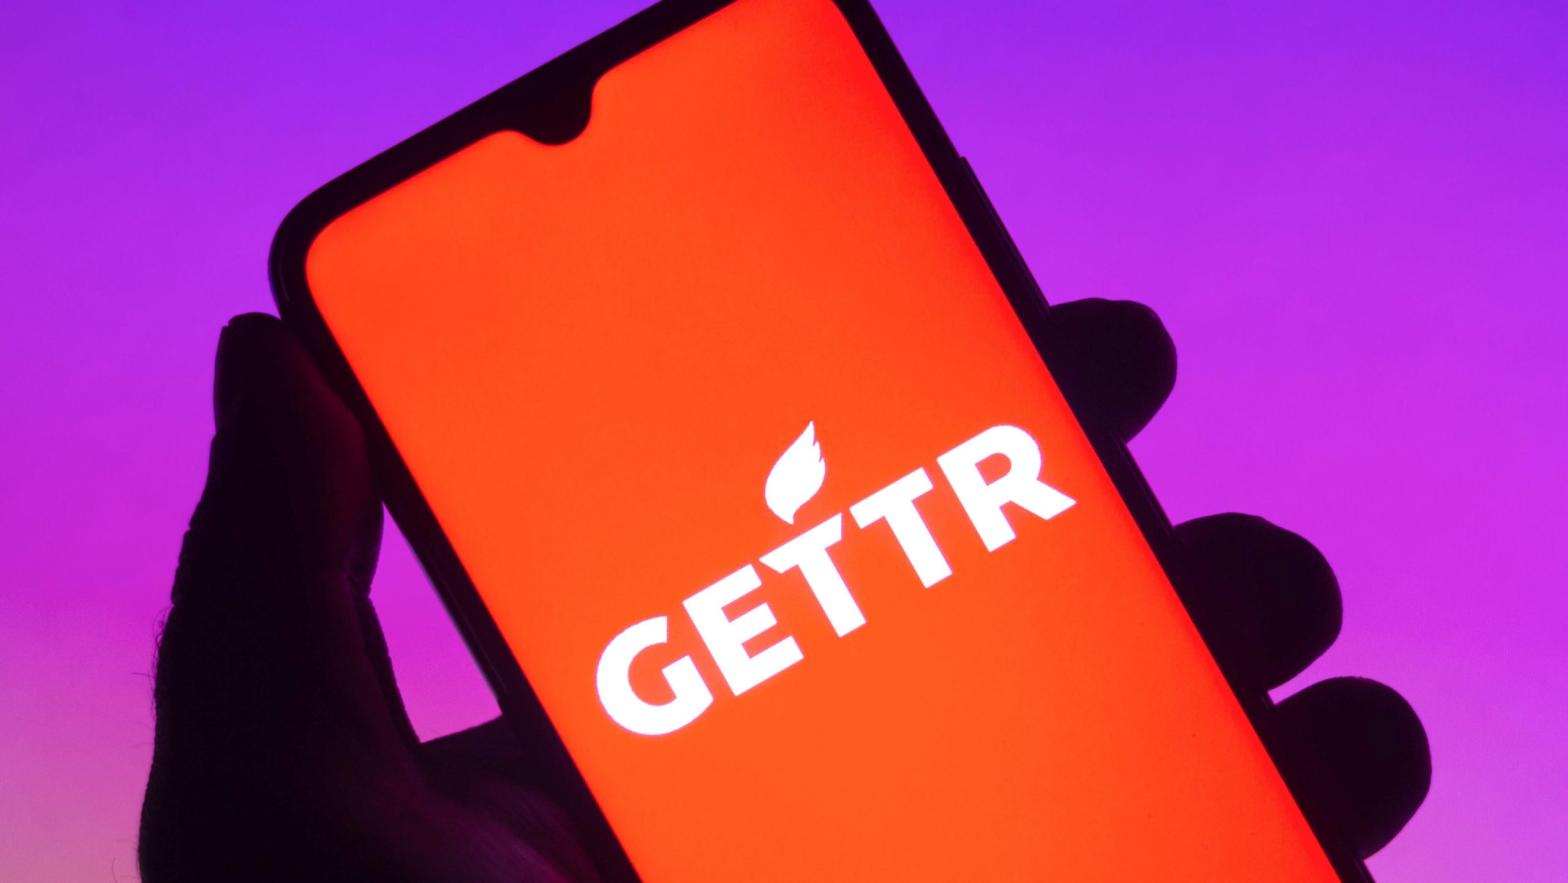 The Gettr logo seen on a smartphone; stock image. (Photo: Rafael Henrique / SOPA Images / LightRocket via Getty Images, Getty Images)